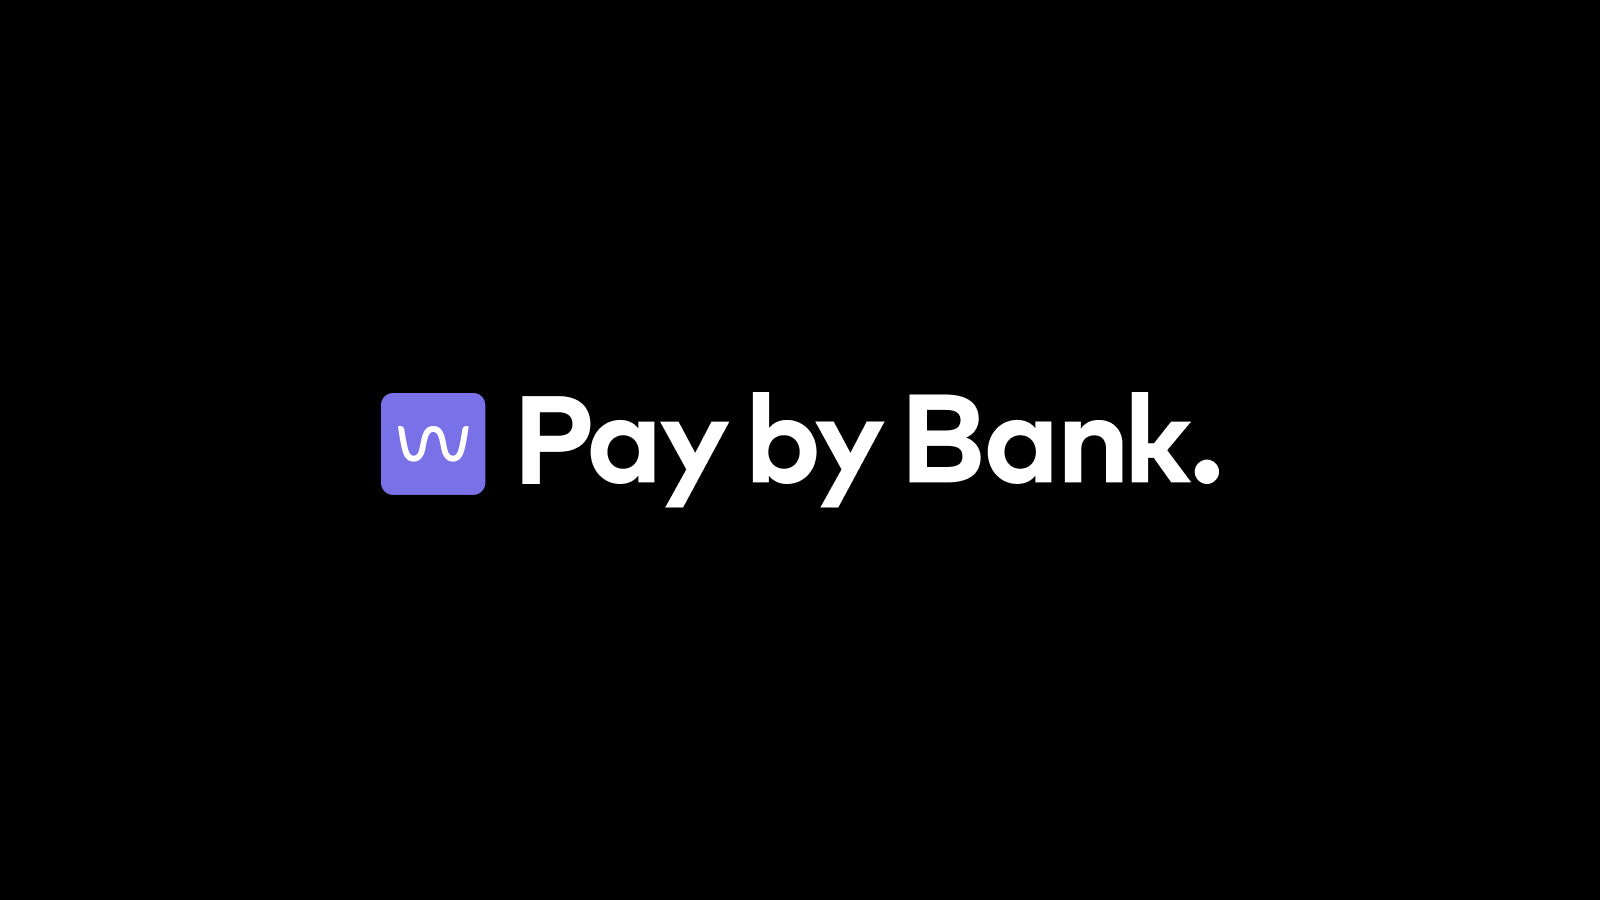 Waave Pay by Bank